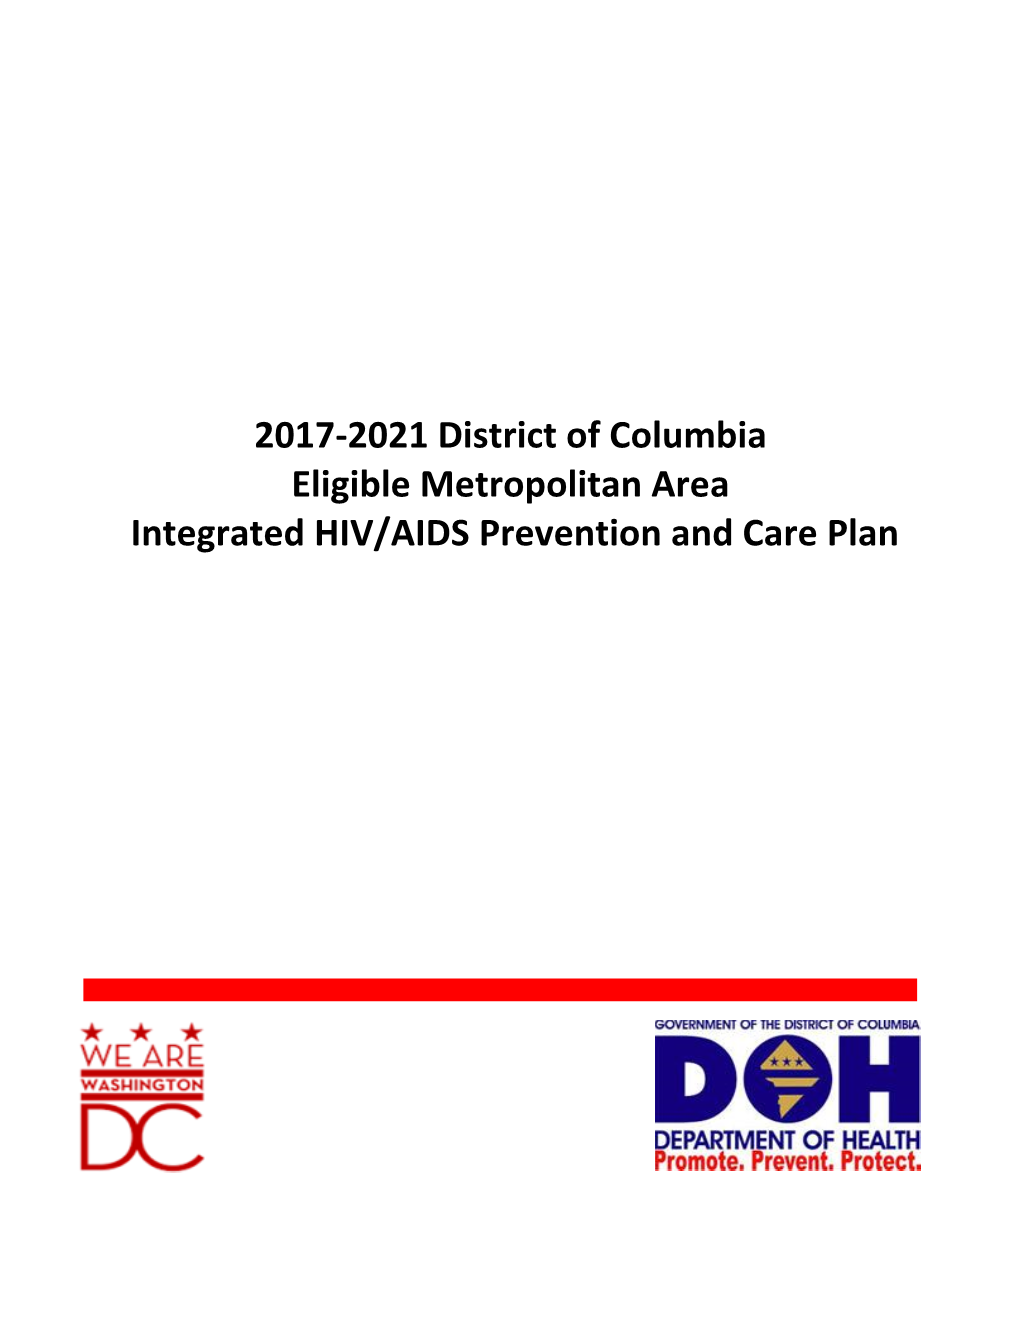 District of Columbia Eligible Metropolitan Area Integrated HIV/AIDS Prevention and Care Plan